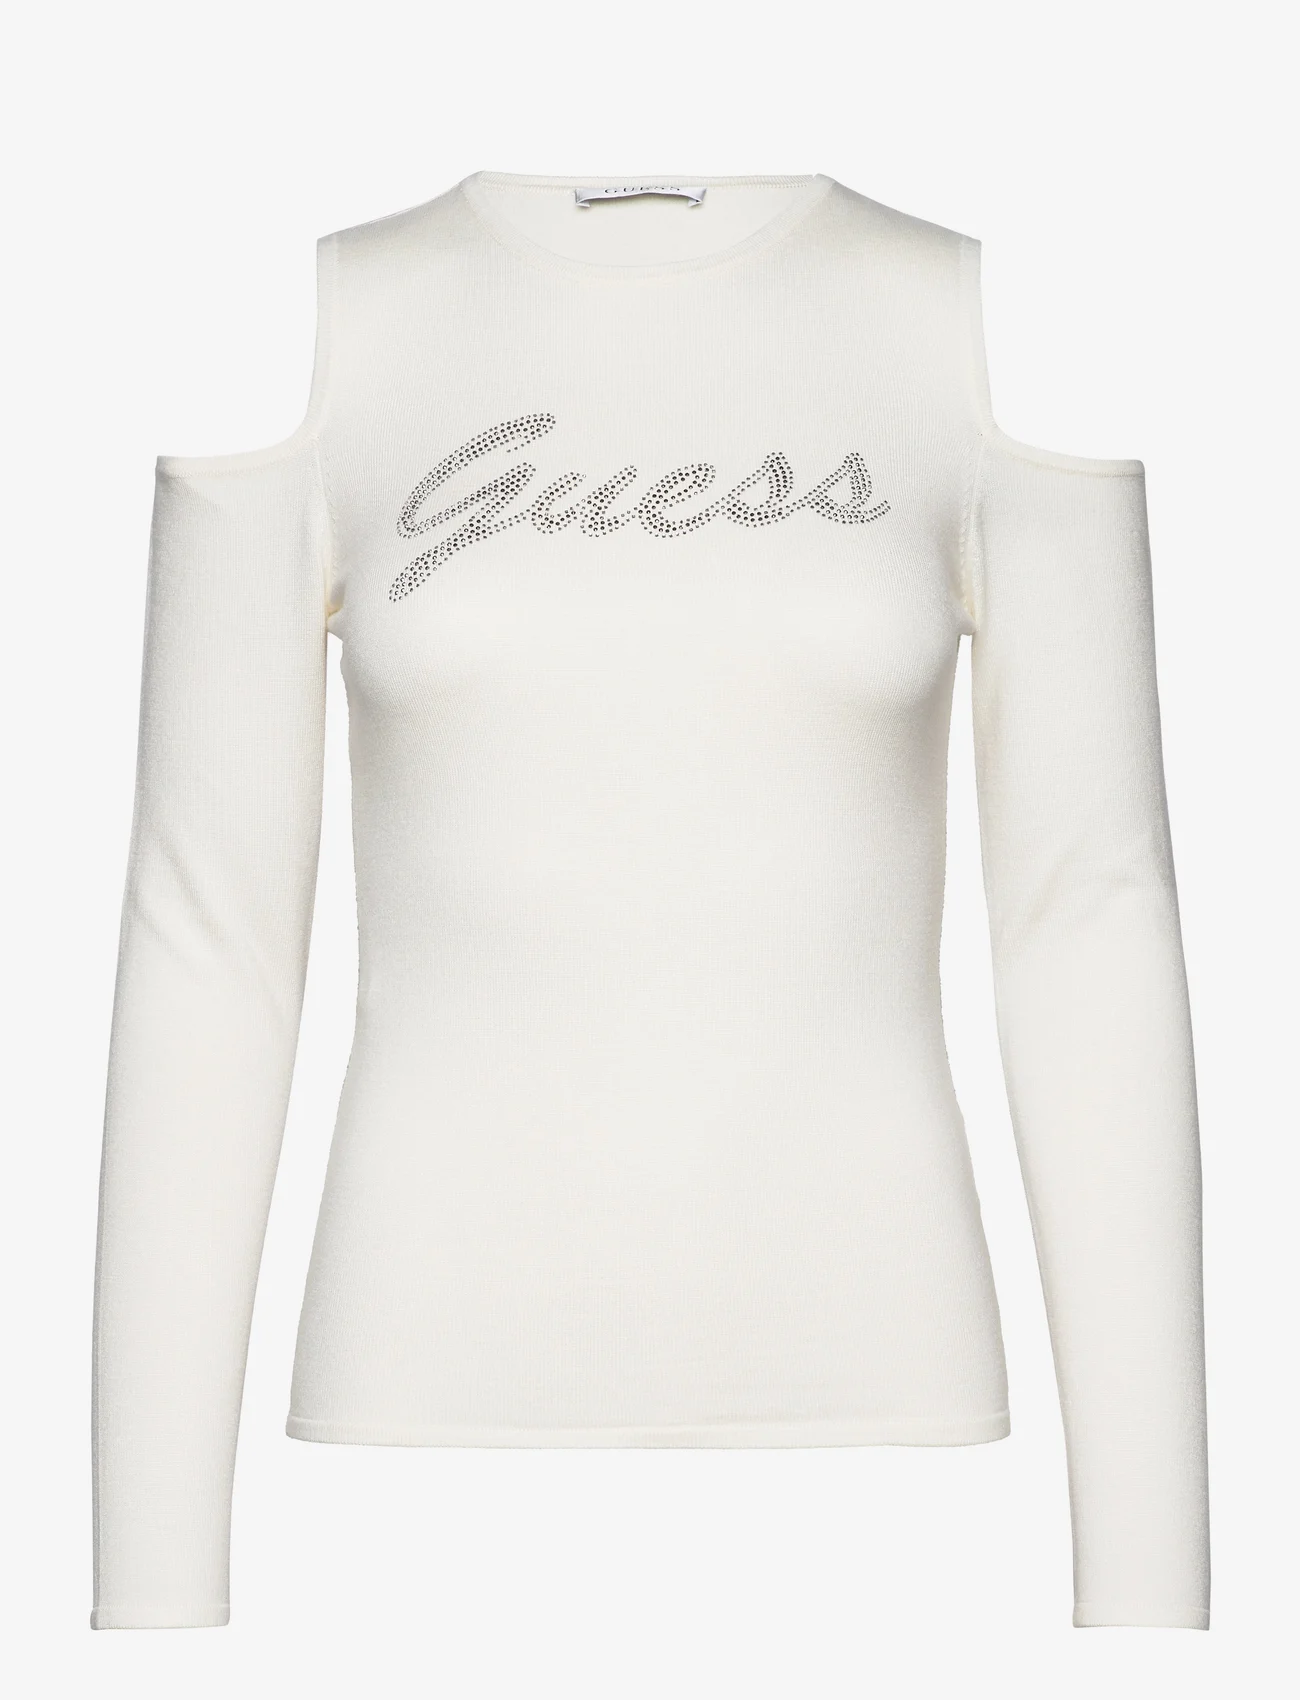 GUESS Jeans - LS COLD SHLDR GUESS LOGO SWTR - long-sleeved tops - dove white - 0